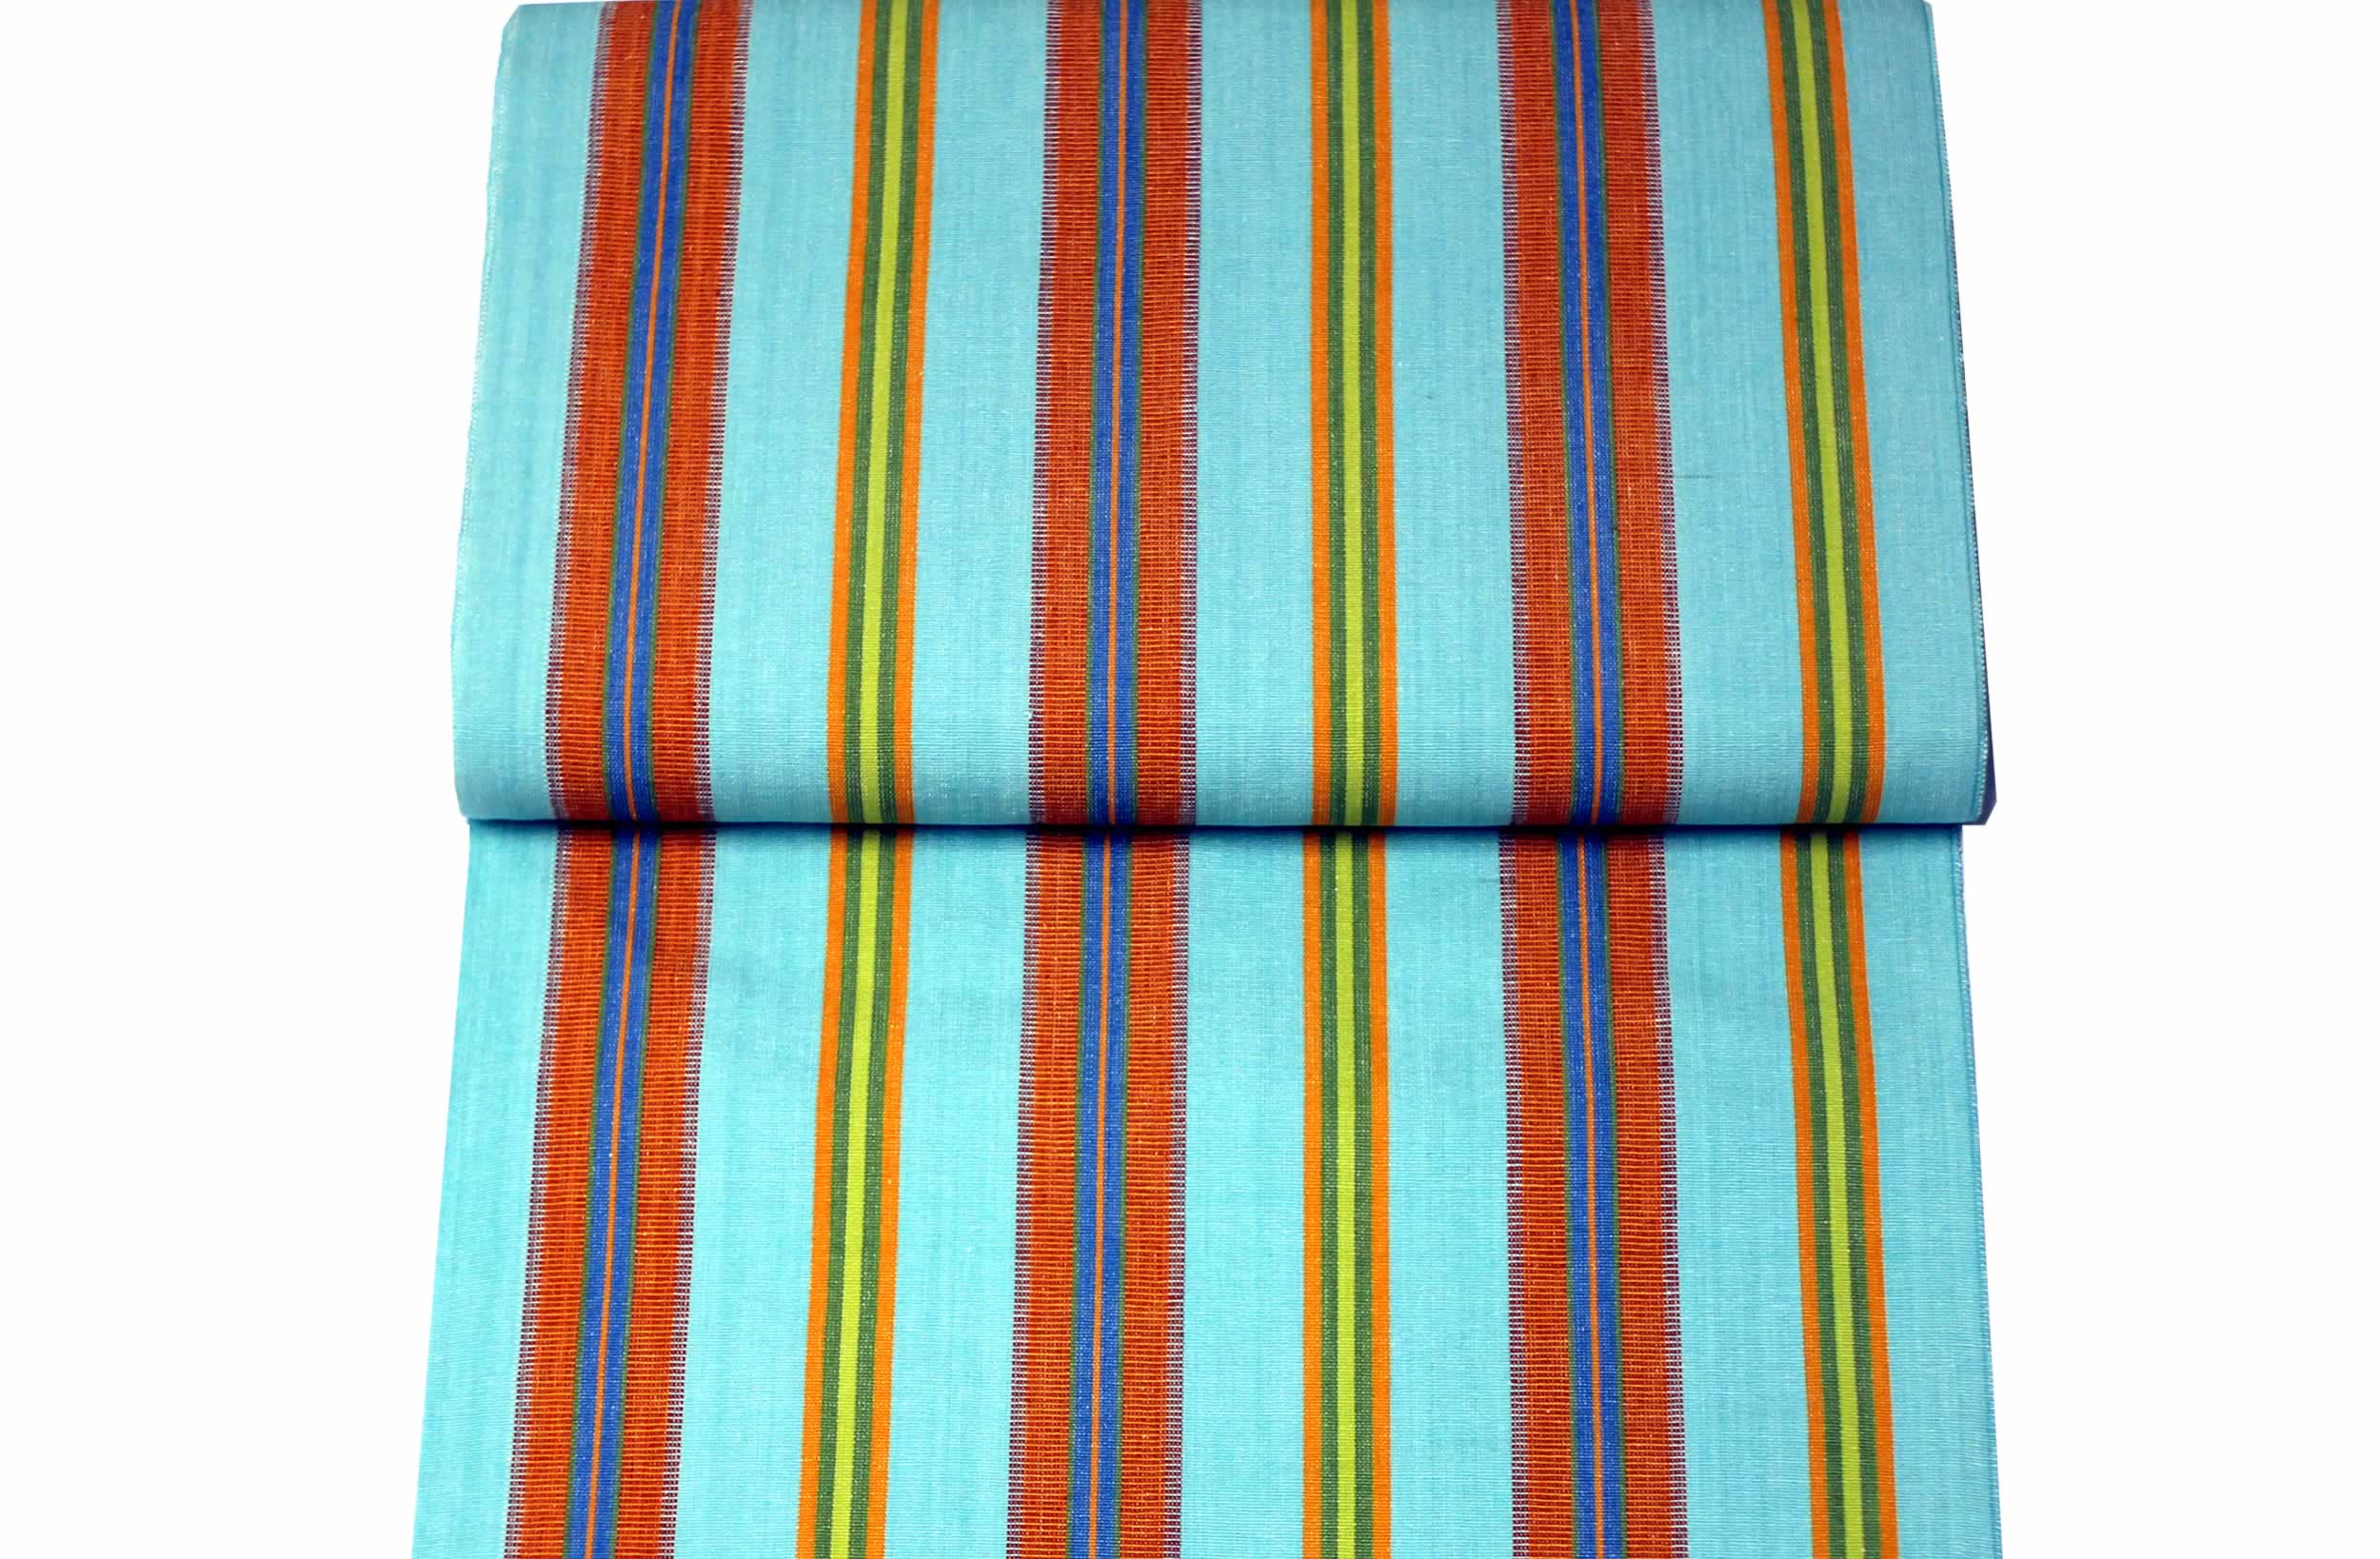 Tiffany blue Replacement Deck Chair Sling - Petanque